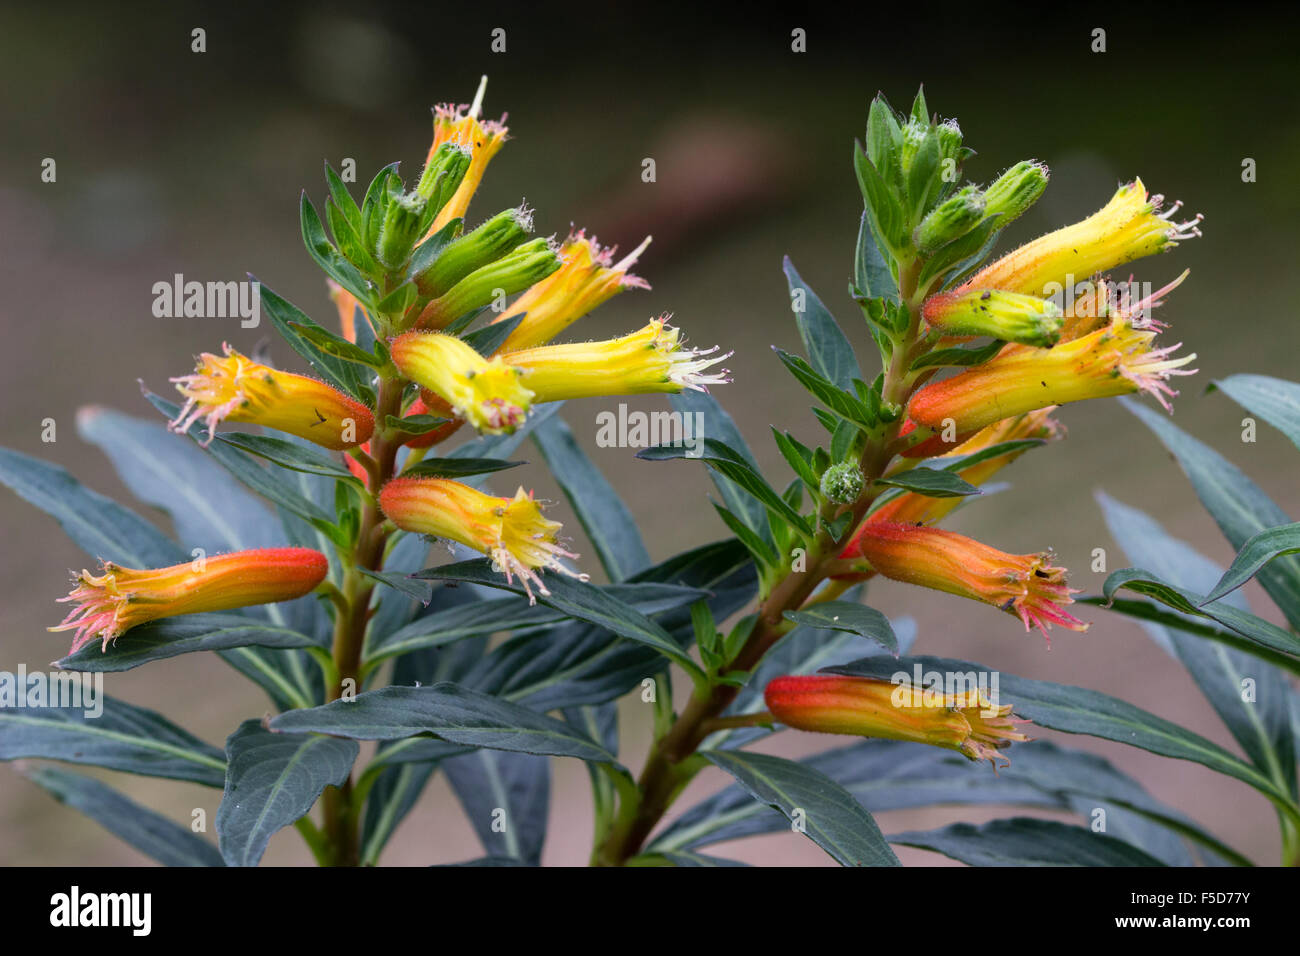 Autumn flowers of the long blooming tender perennial, Cuphea micropetala Stock Photo